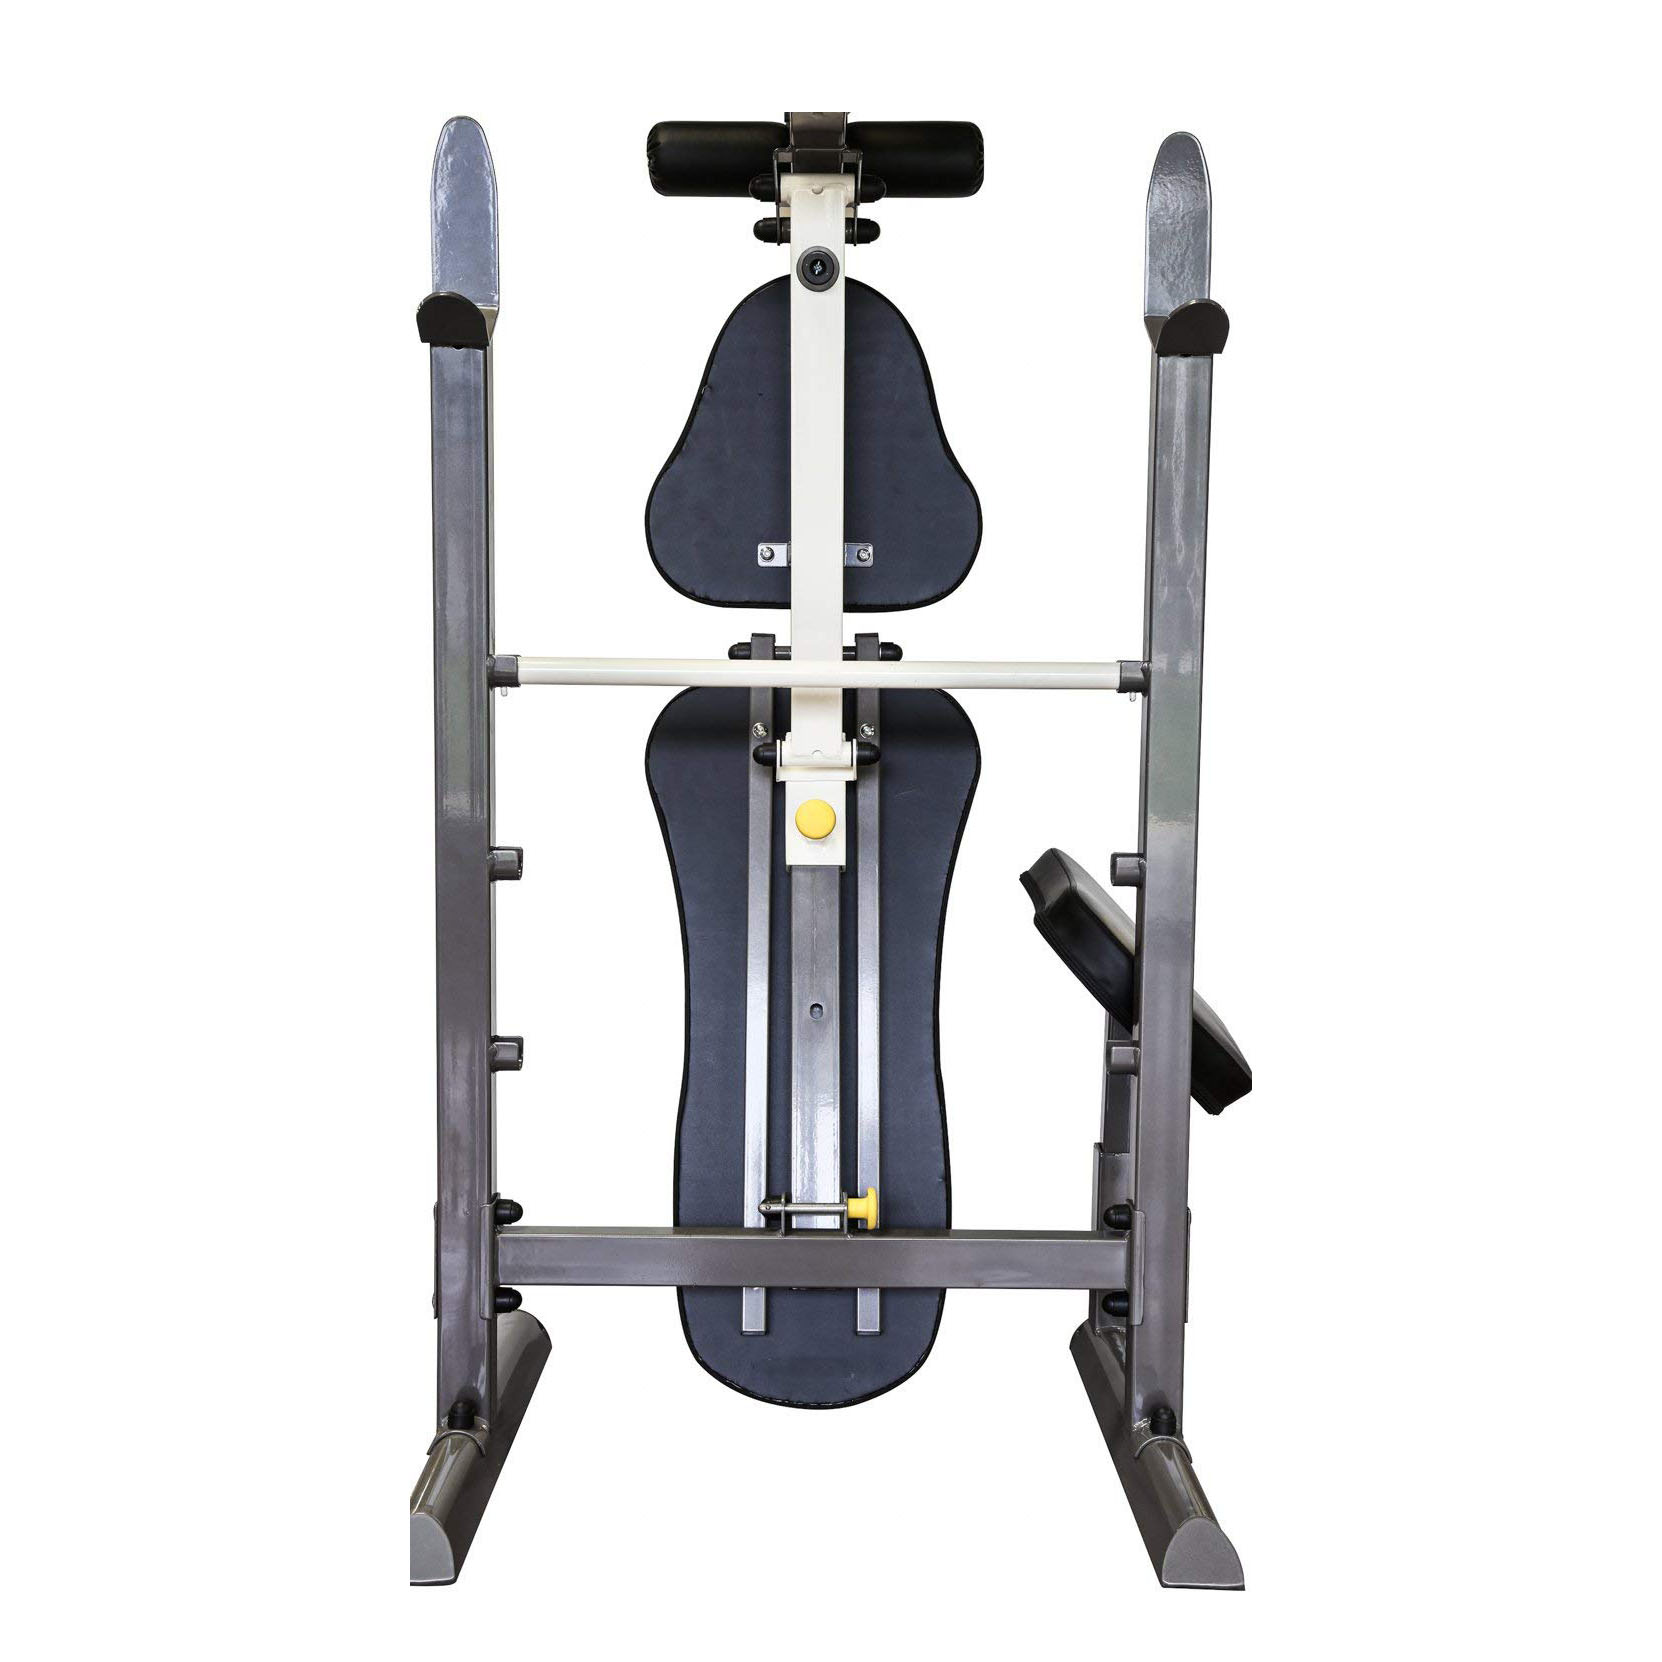 Marcy Foldable Standard Weight Benches MWB-20100 - image 2 of 3